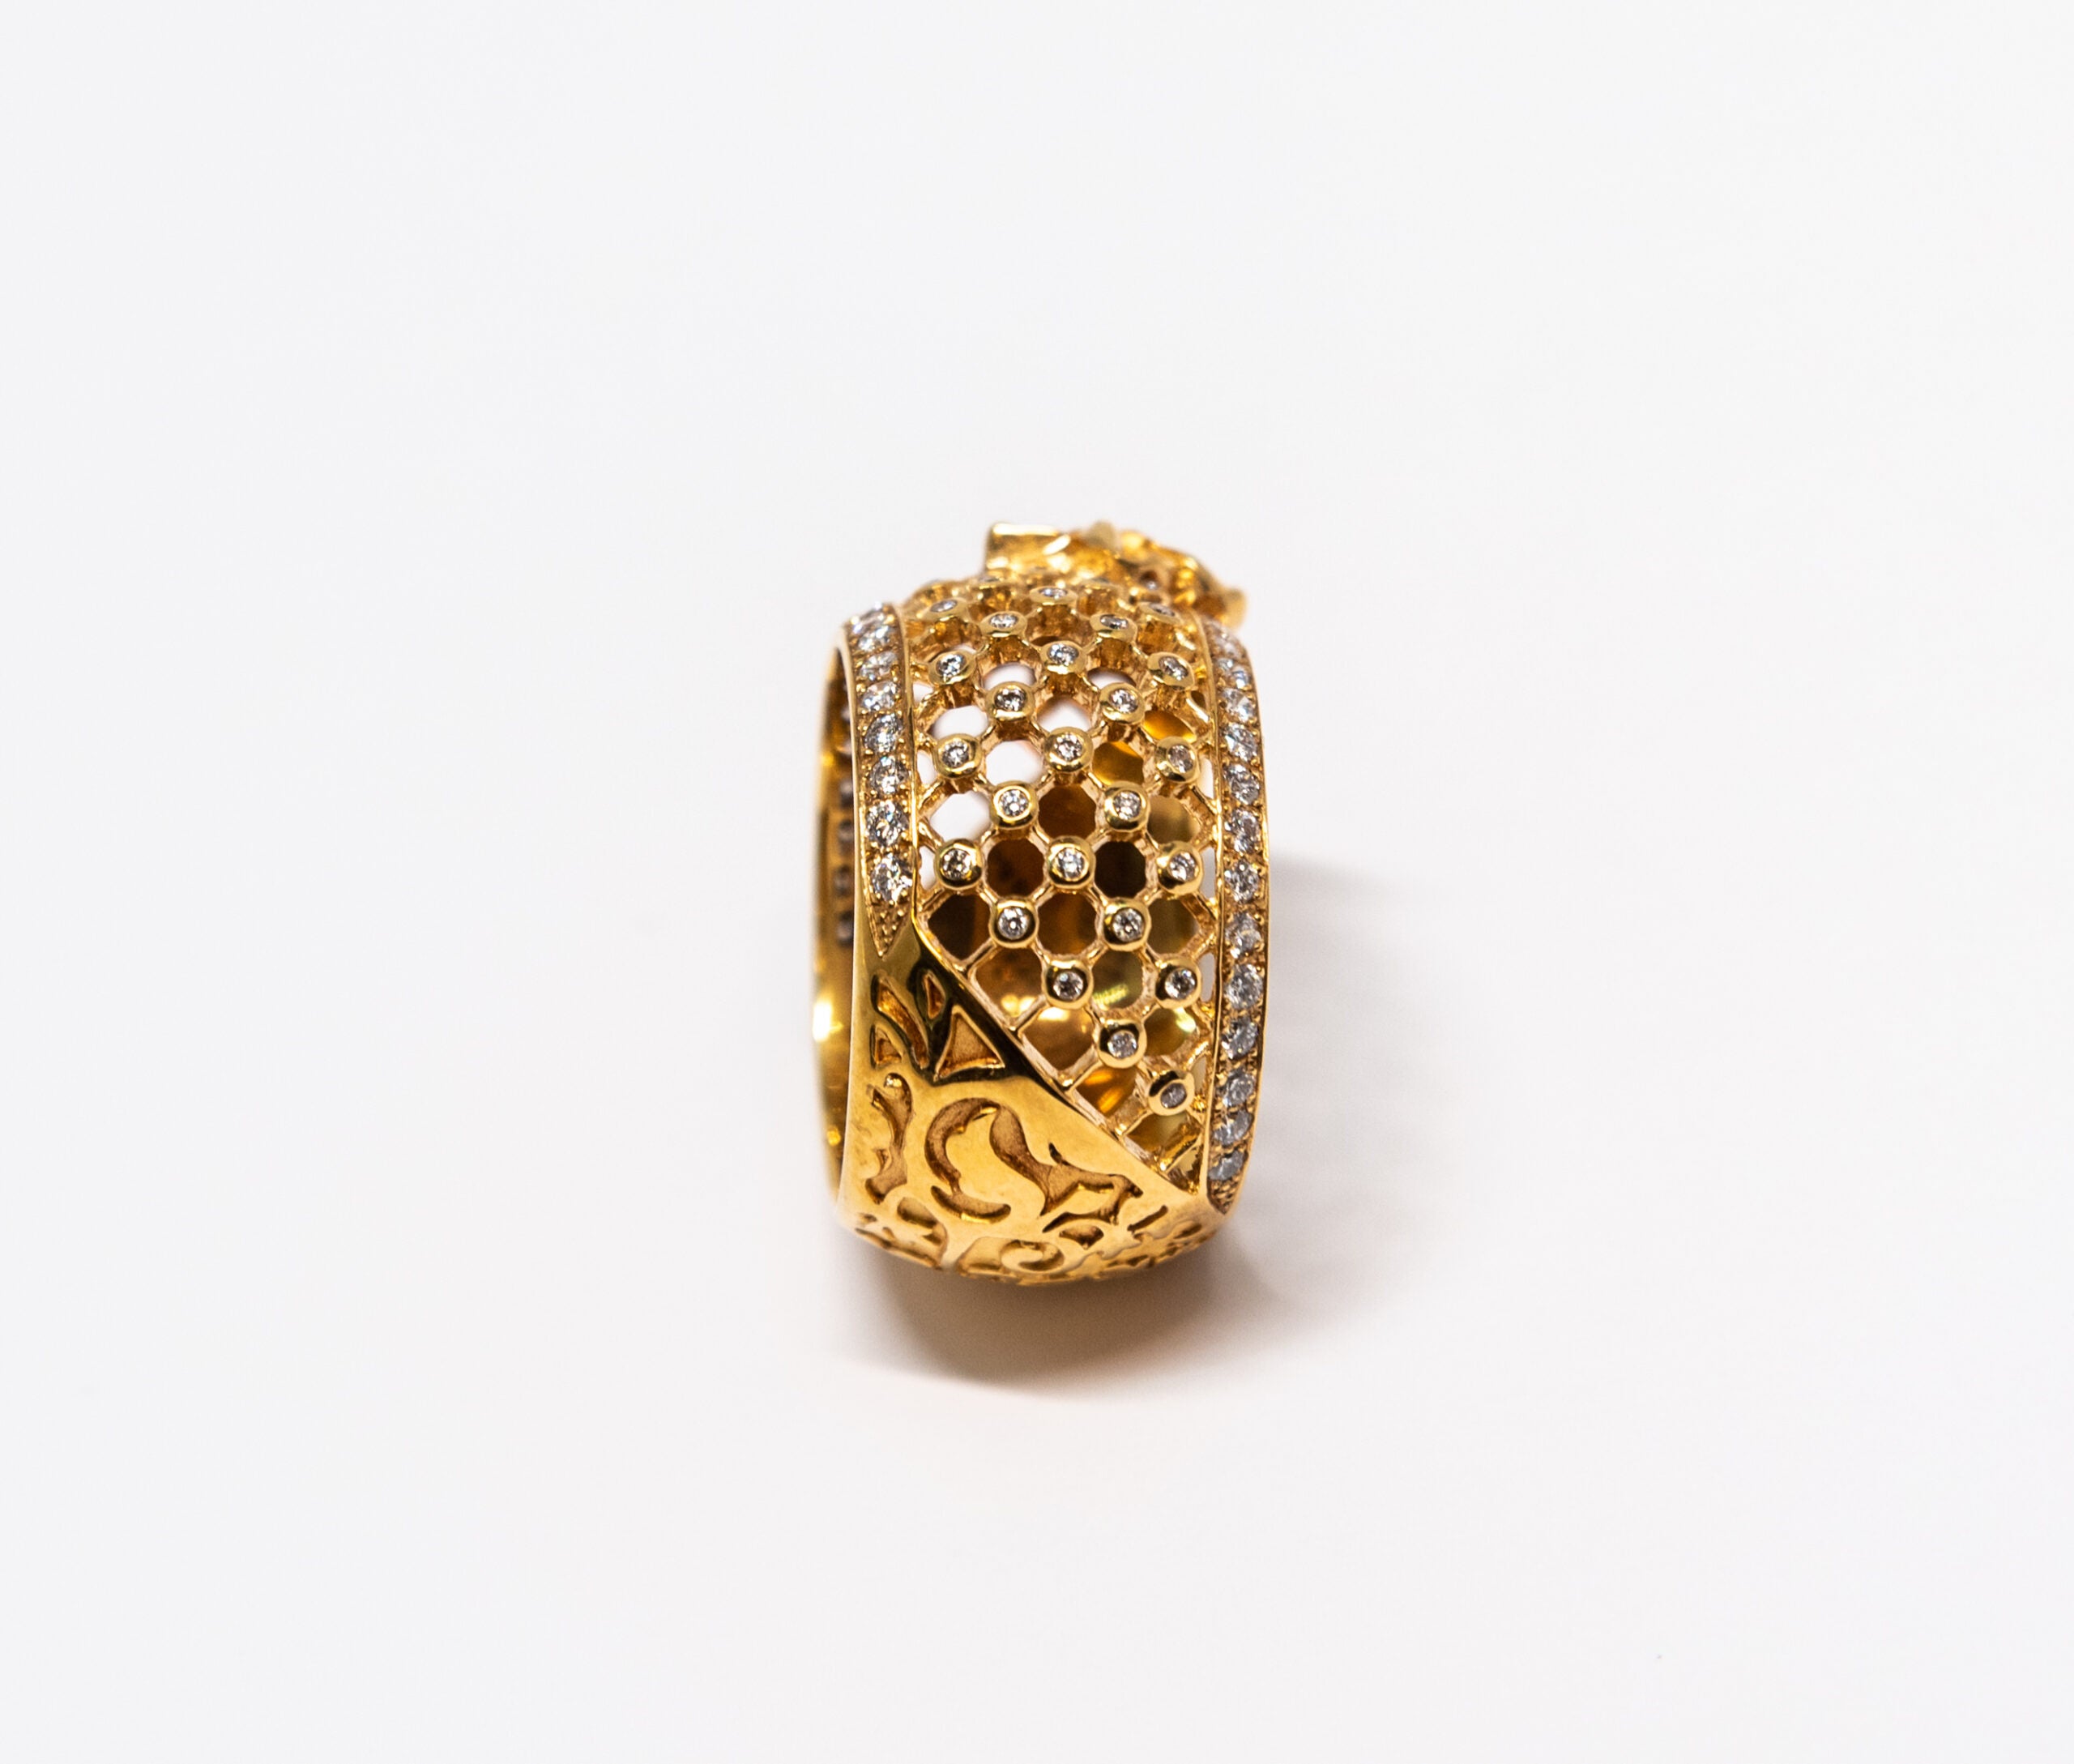 Carrera Y Carrera Sierpes 18K Yellow Gold and Diamonds Ring